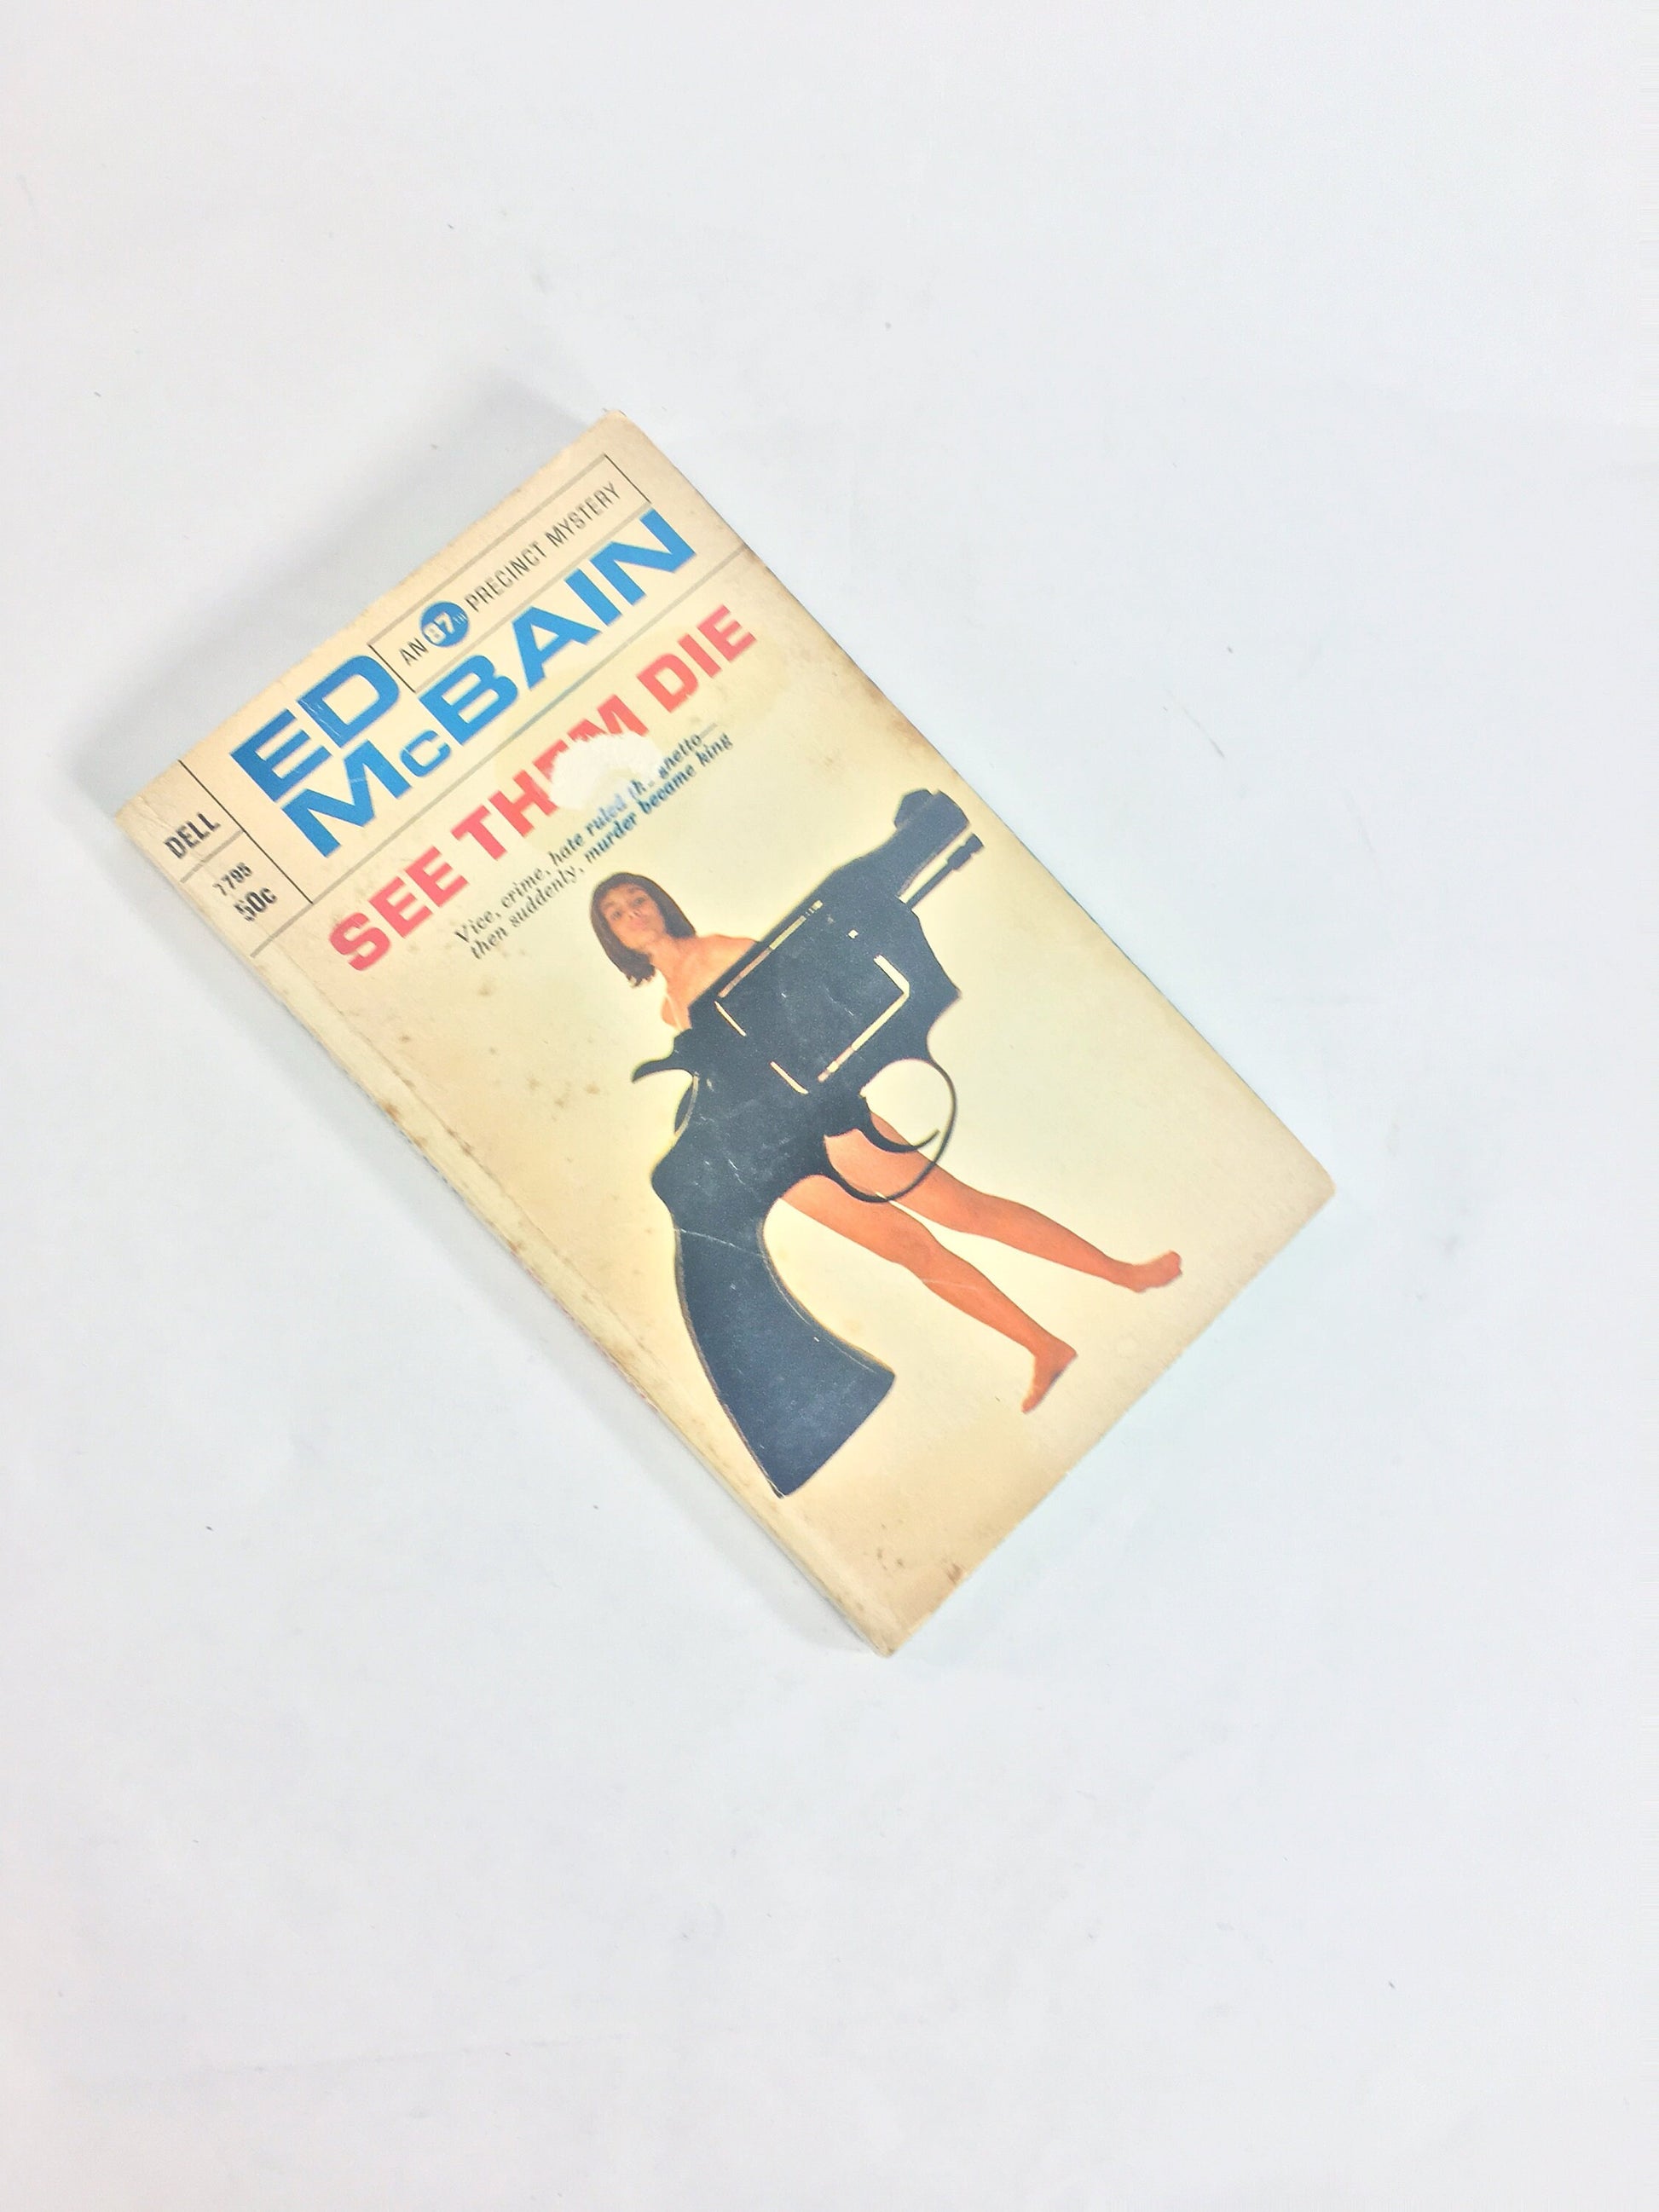 See Them Die by Ed McBain. Vintage paperback circa 1969. FIRST PRINTING. Salvatore Albert Lombino Crime Fiction